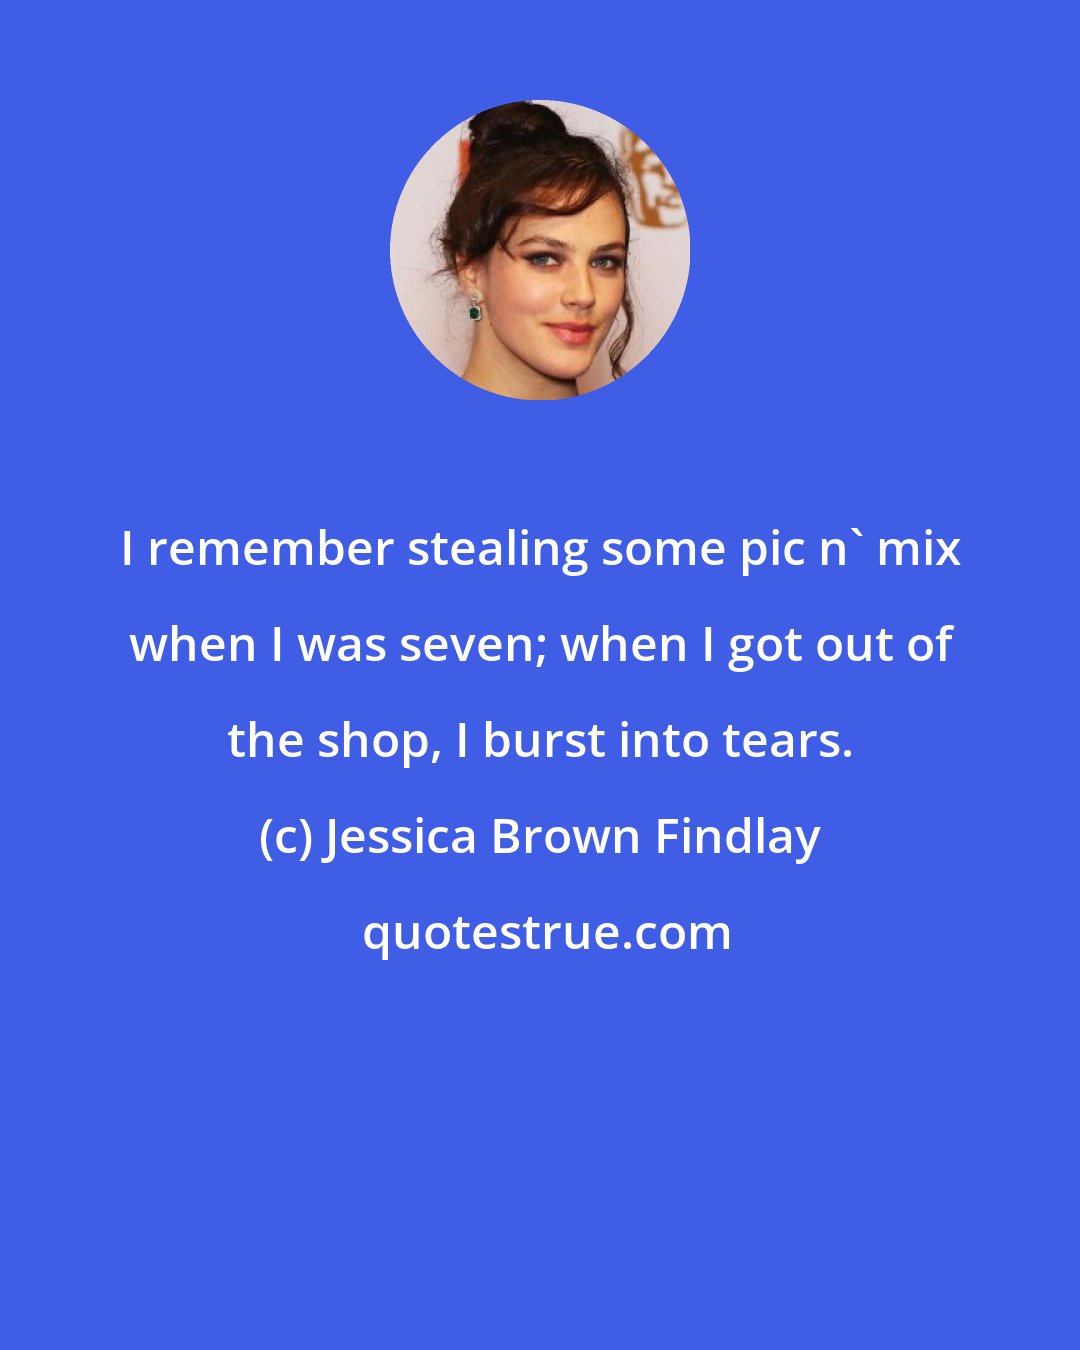 Jessica Brown Findlay: I remember stealing some pic n' mix when I was seven; when I got out of the shop, I burst into tears.